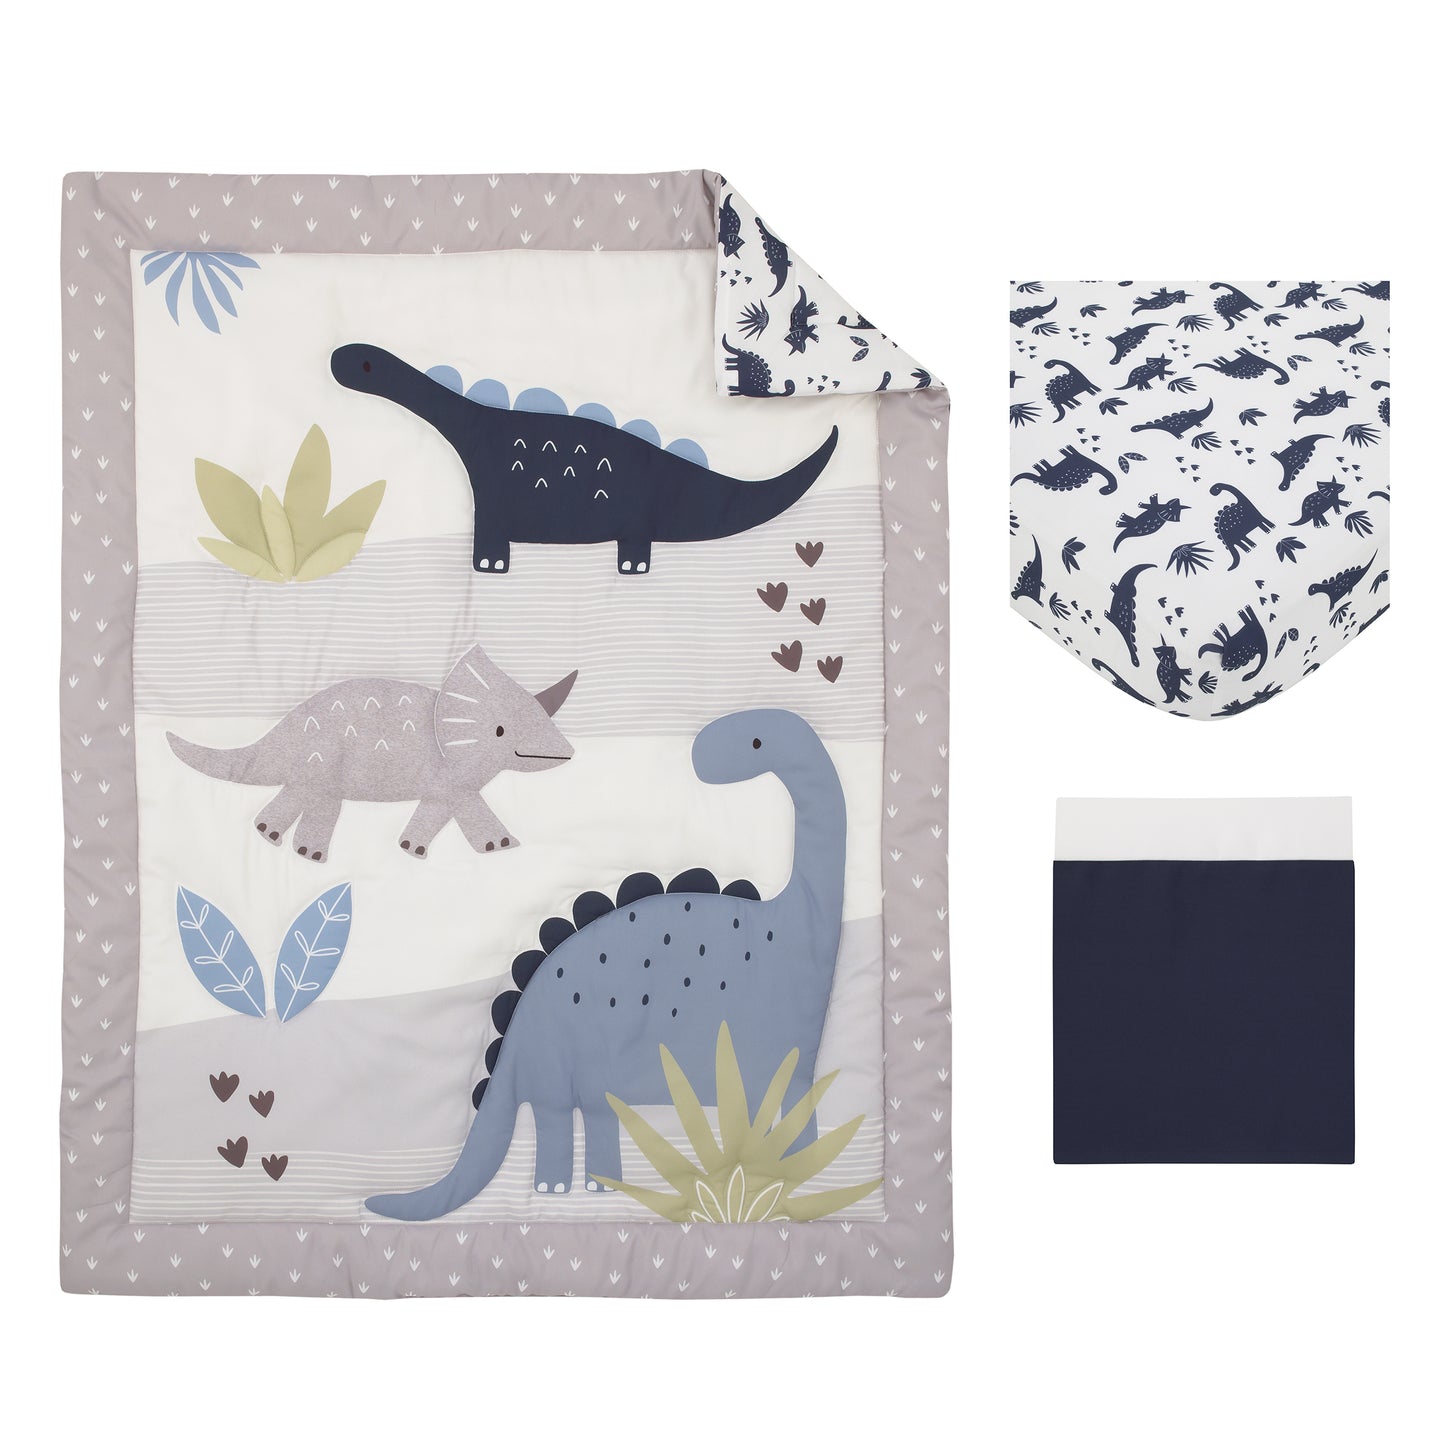 Carter's Dino Adventure Gray and Blue 3 Piece Crib Bedding Set - Comforter, Fitted Crib Sheet, and Crib Skirt